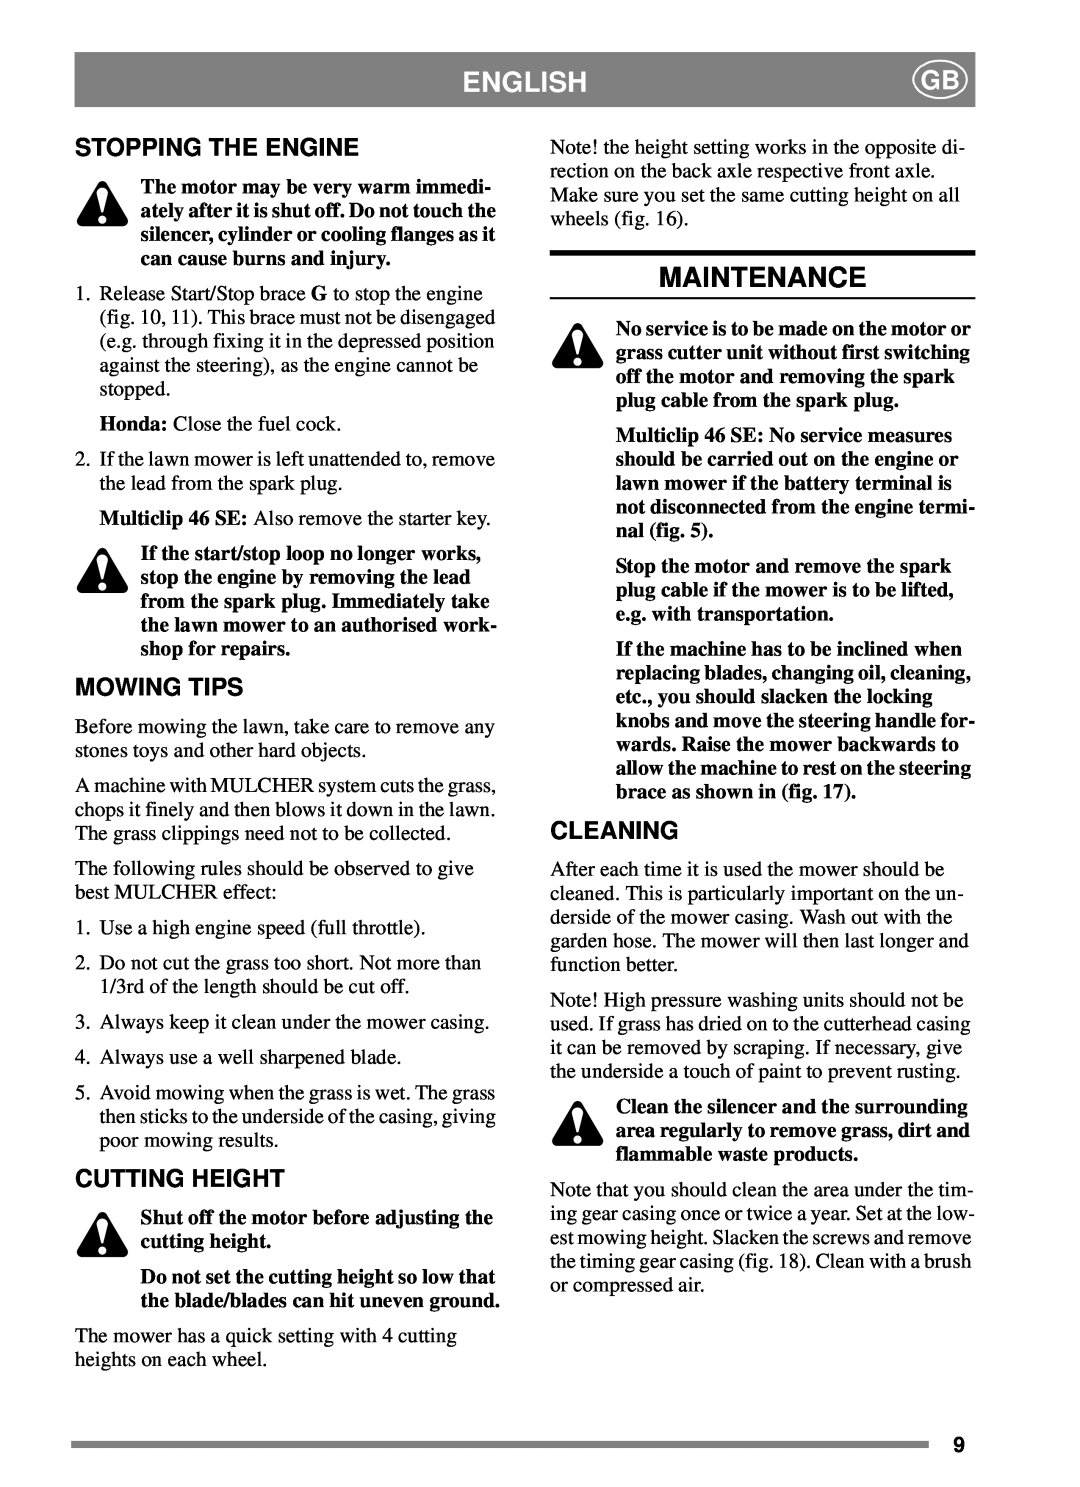 Stiga 8211-0203-09 manual Maintenance, Stopping The Engine, Mowing Tips, Cleaning, Cutting Height, English 